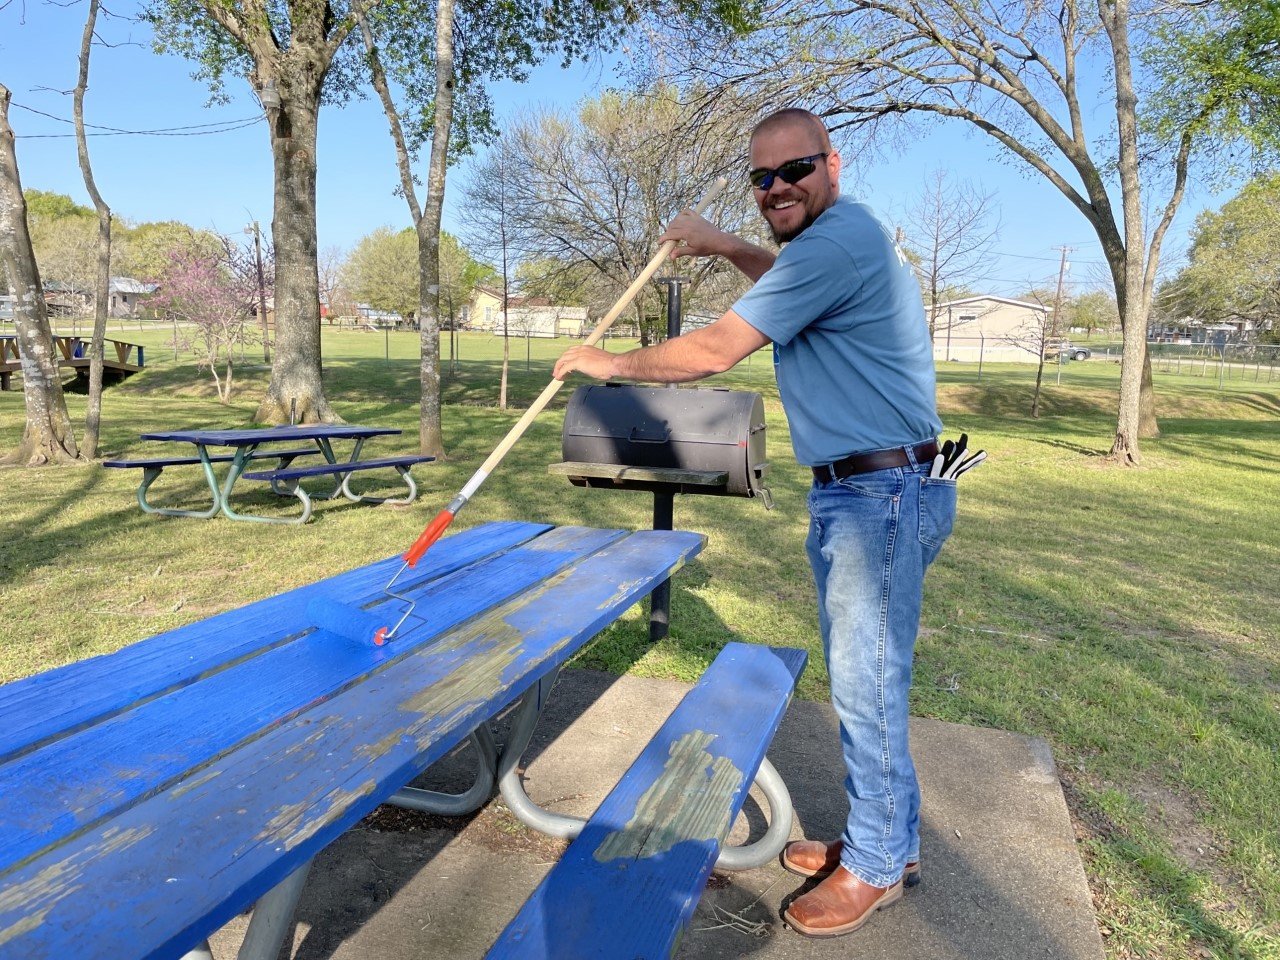 LCRA employee Matt Vinklarek paints a picnic table at the city park in Waelder during LCRA’s Steps Forward Day on April 1. During the annual day of service, employees worked on more than 30 community projects throughout the LCRA service territory.